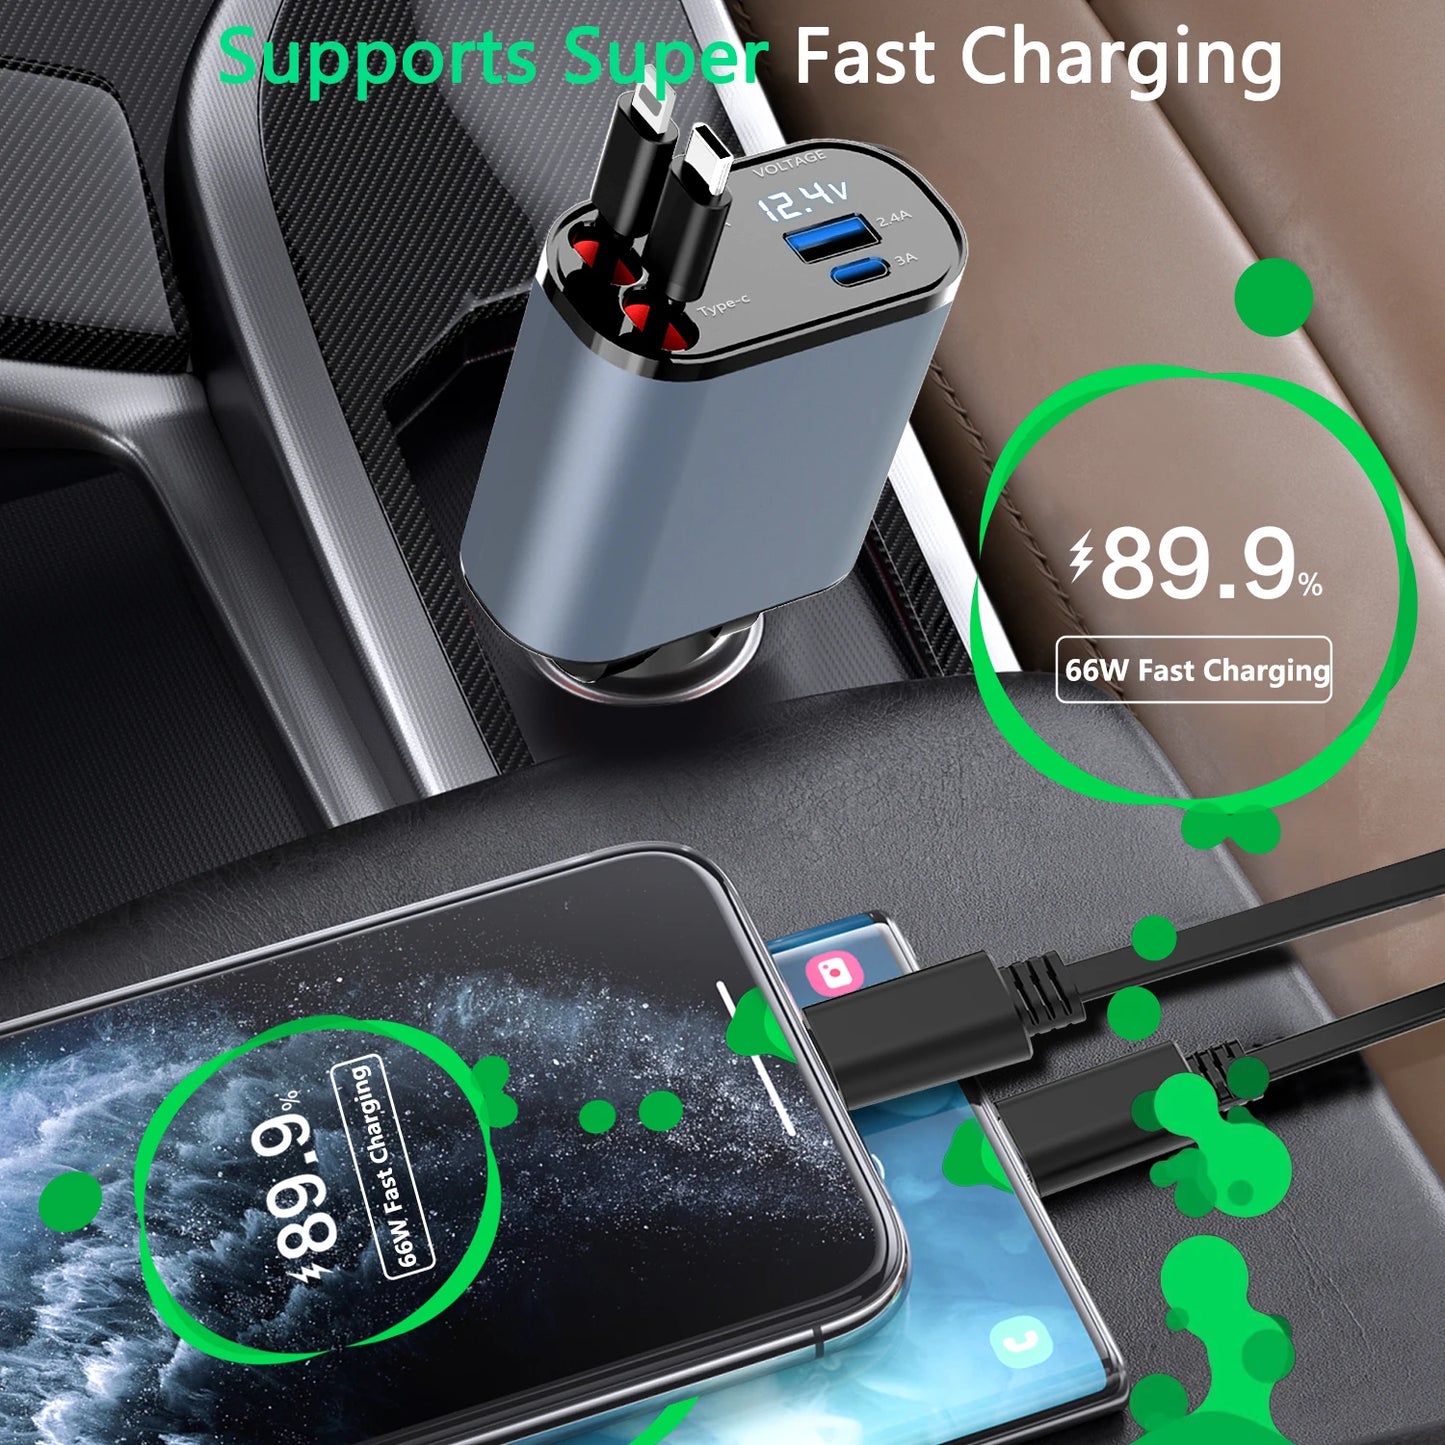 330accessories 4 in 1 Retractable Fast Charging Car Charger